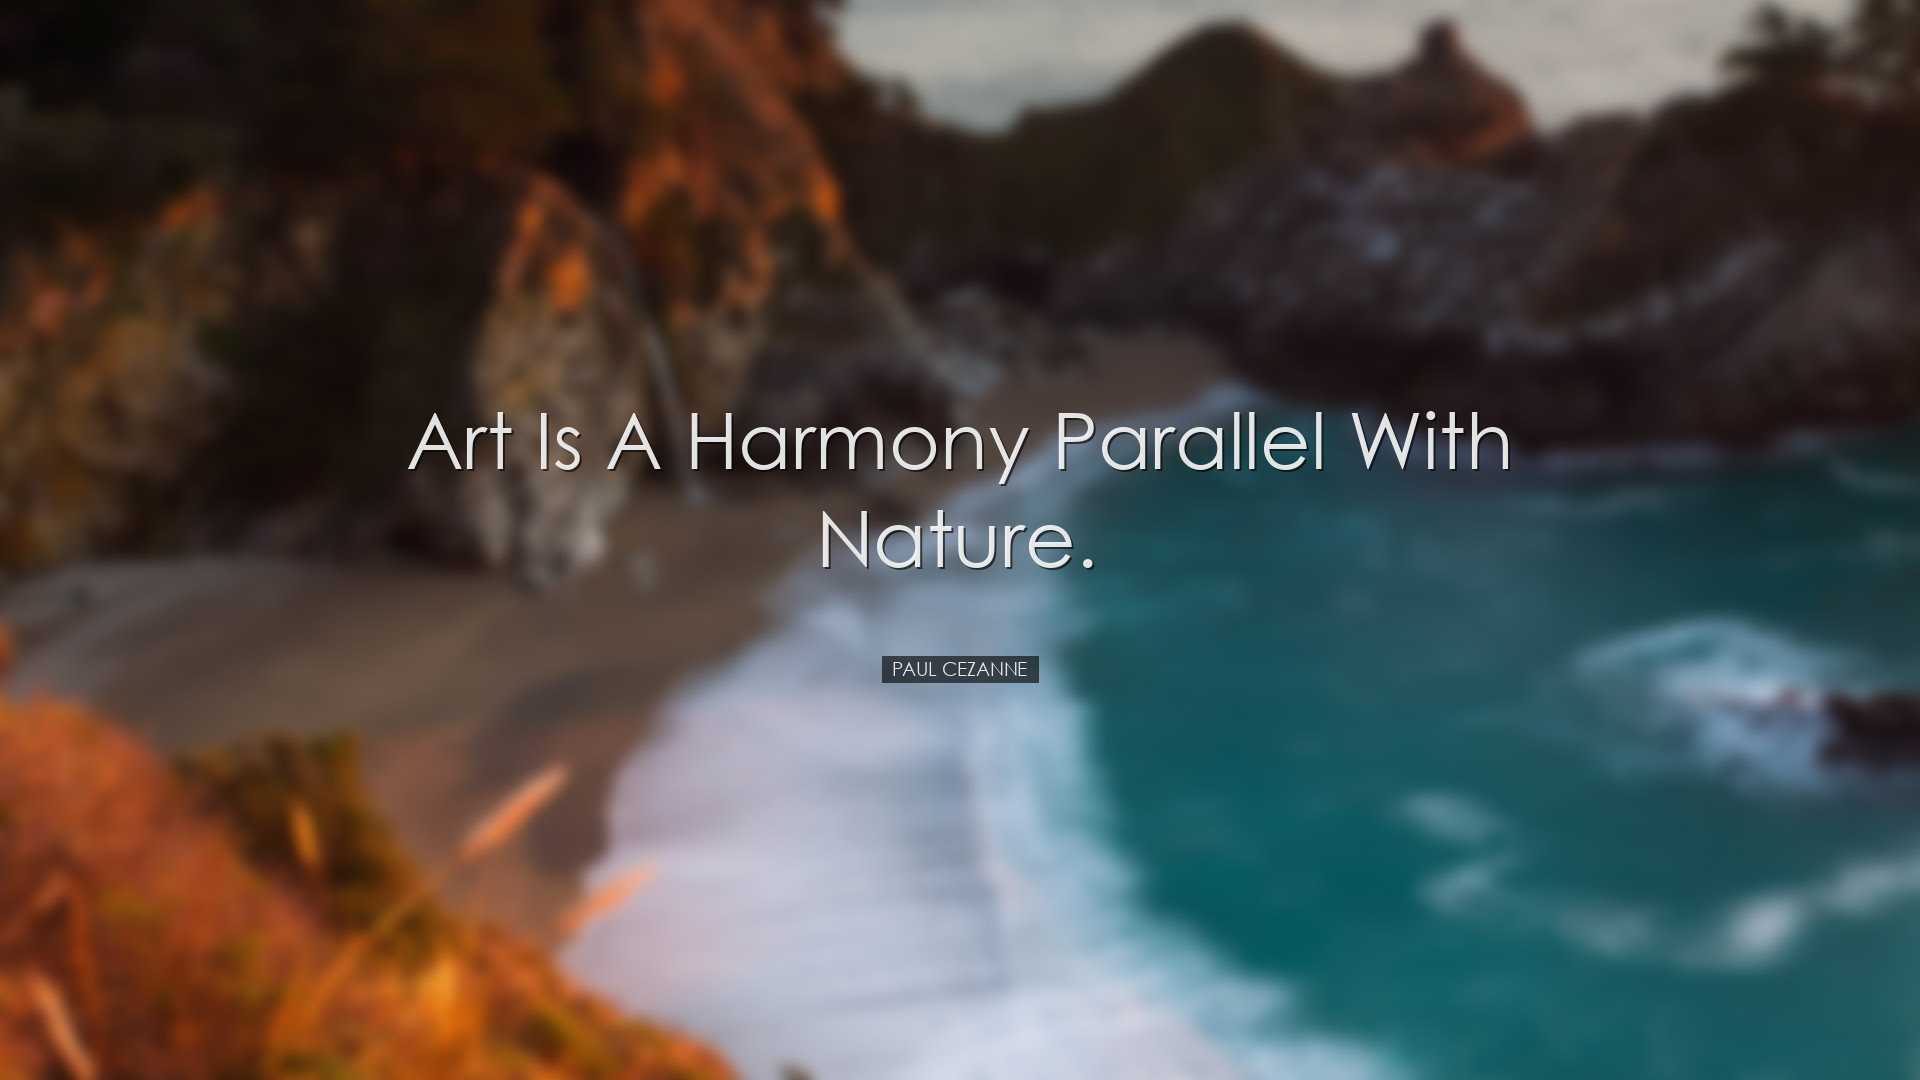 Art is a harmony parallel with nature. - Paul Cezanne